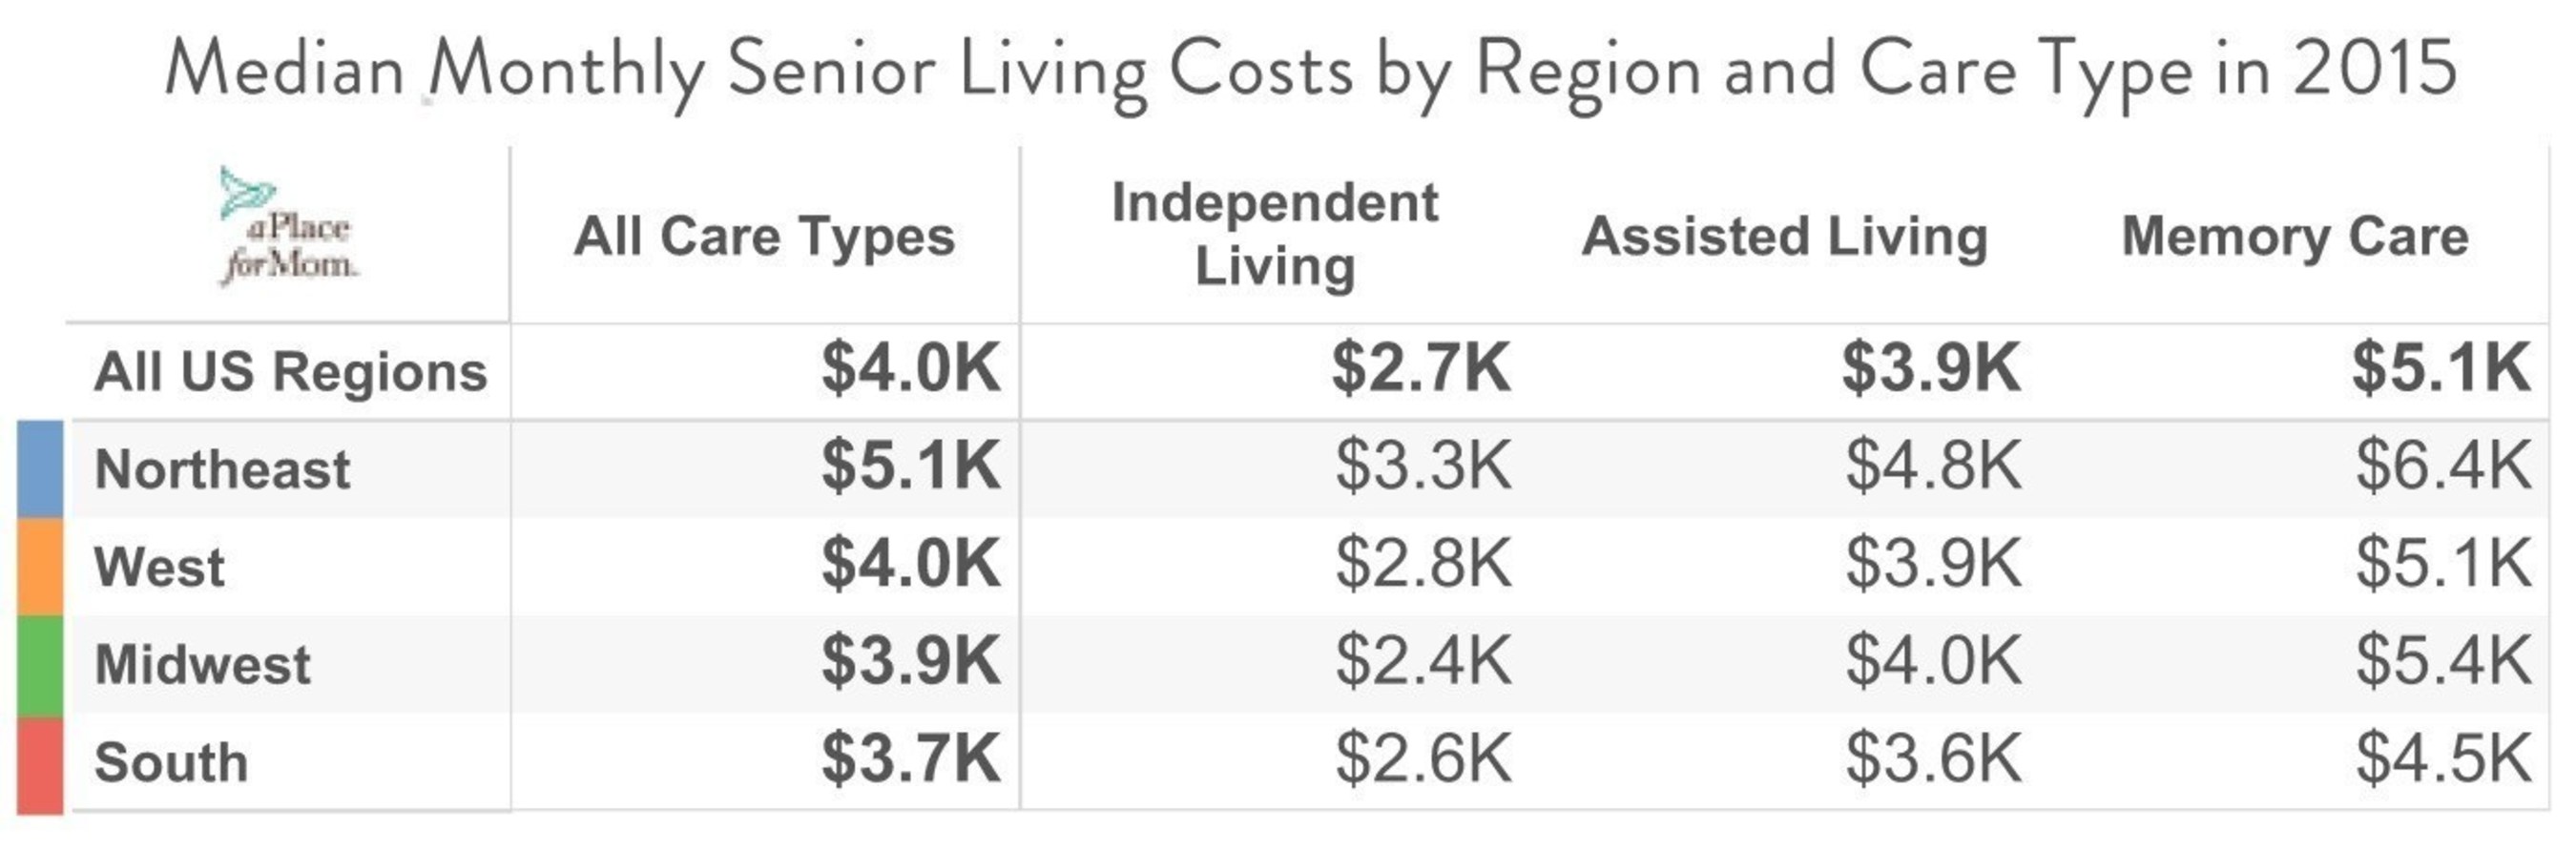 Median Monthly Senior Living Costs by Region and Care Type in 2015 (Chart 1)